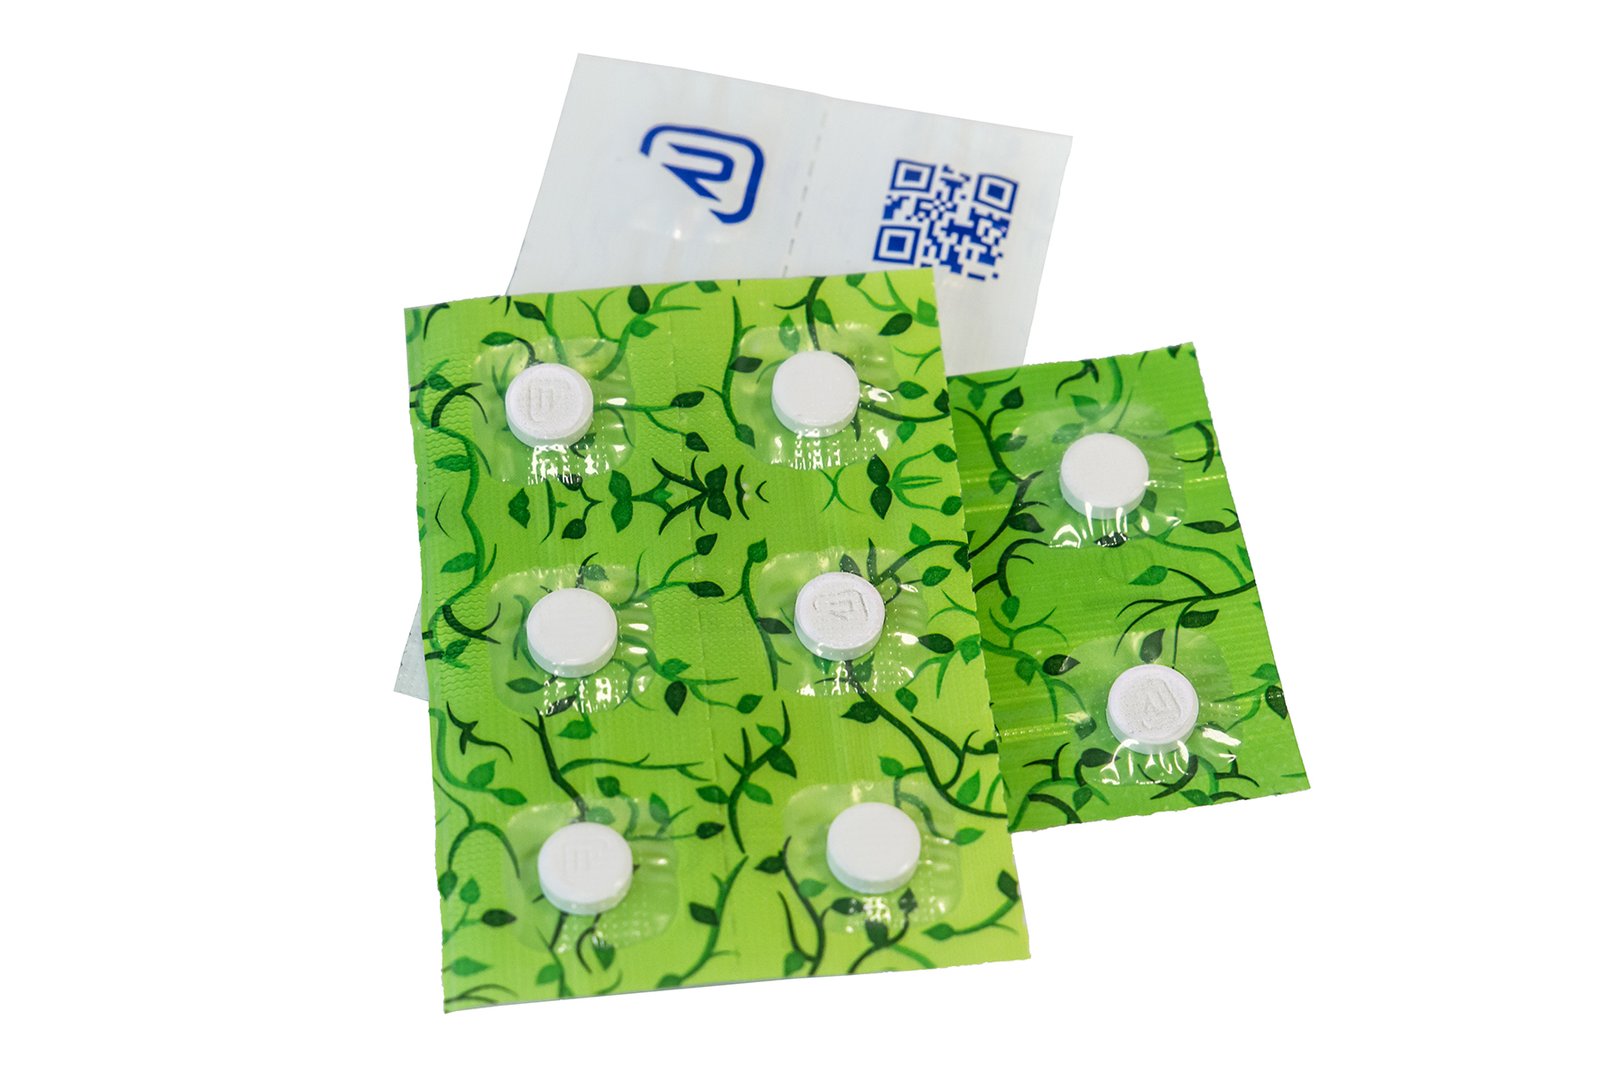 Recyclable Push Packs made from polyolefin laminate